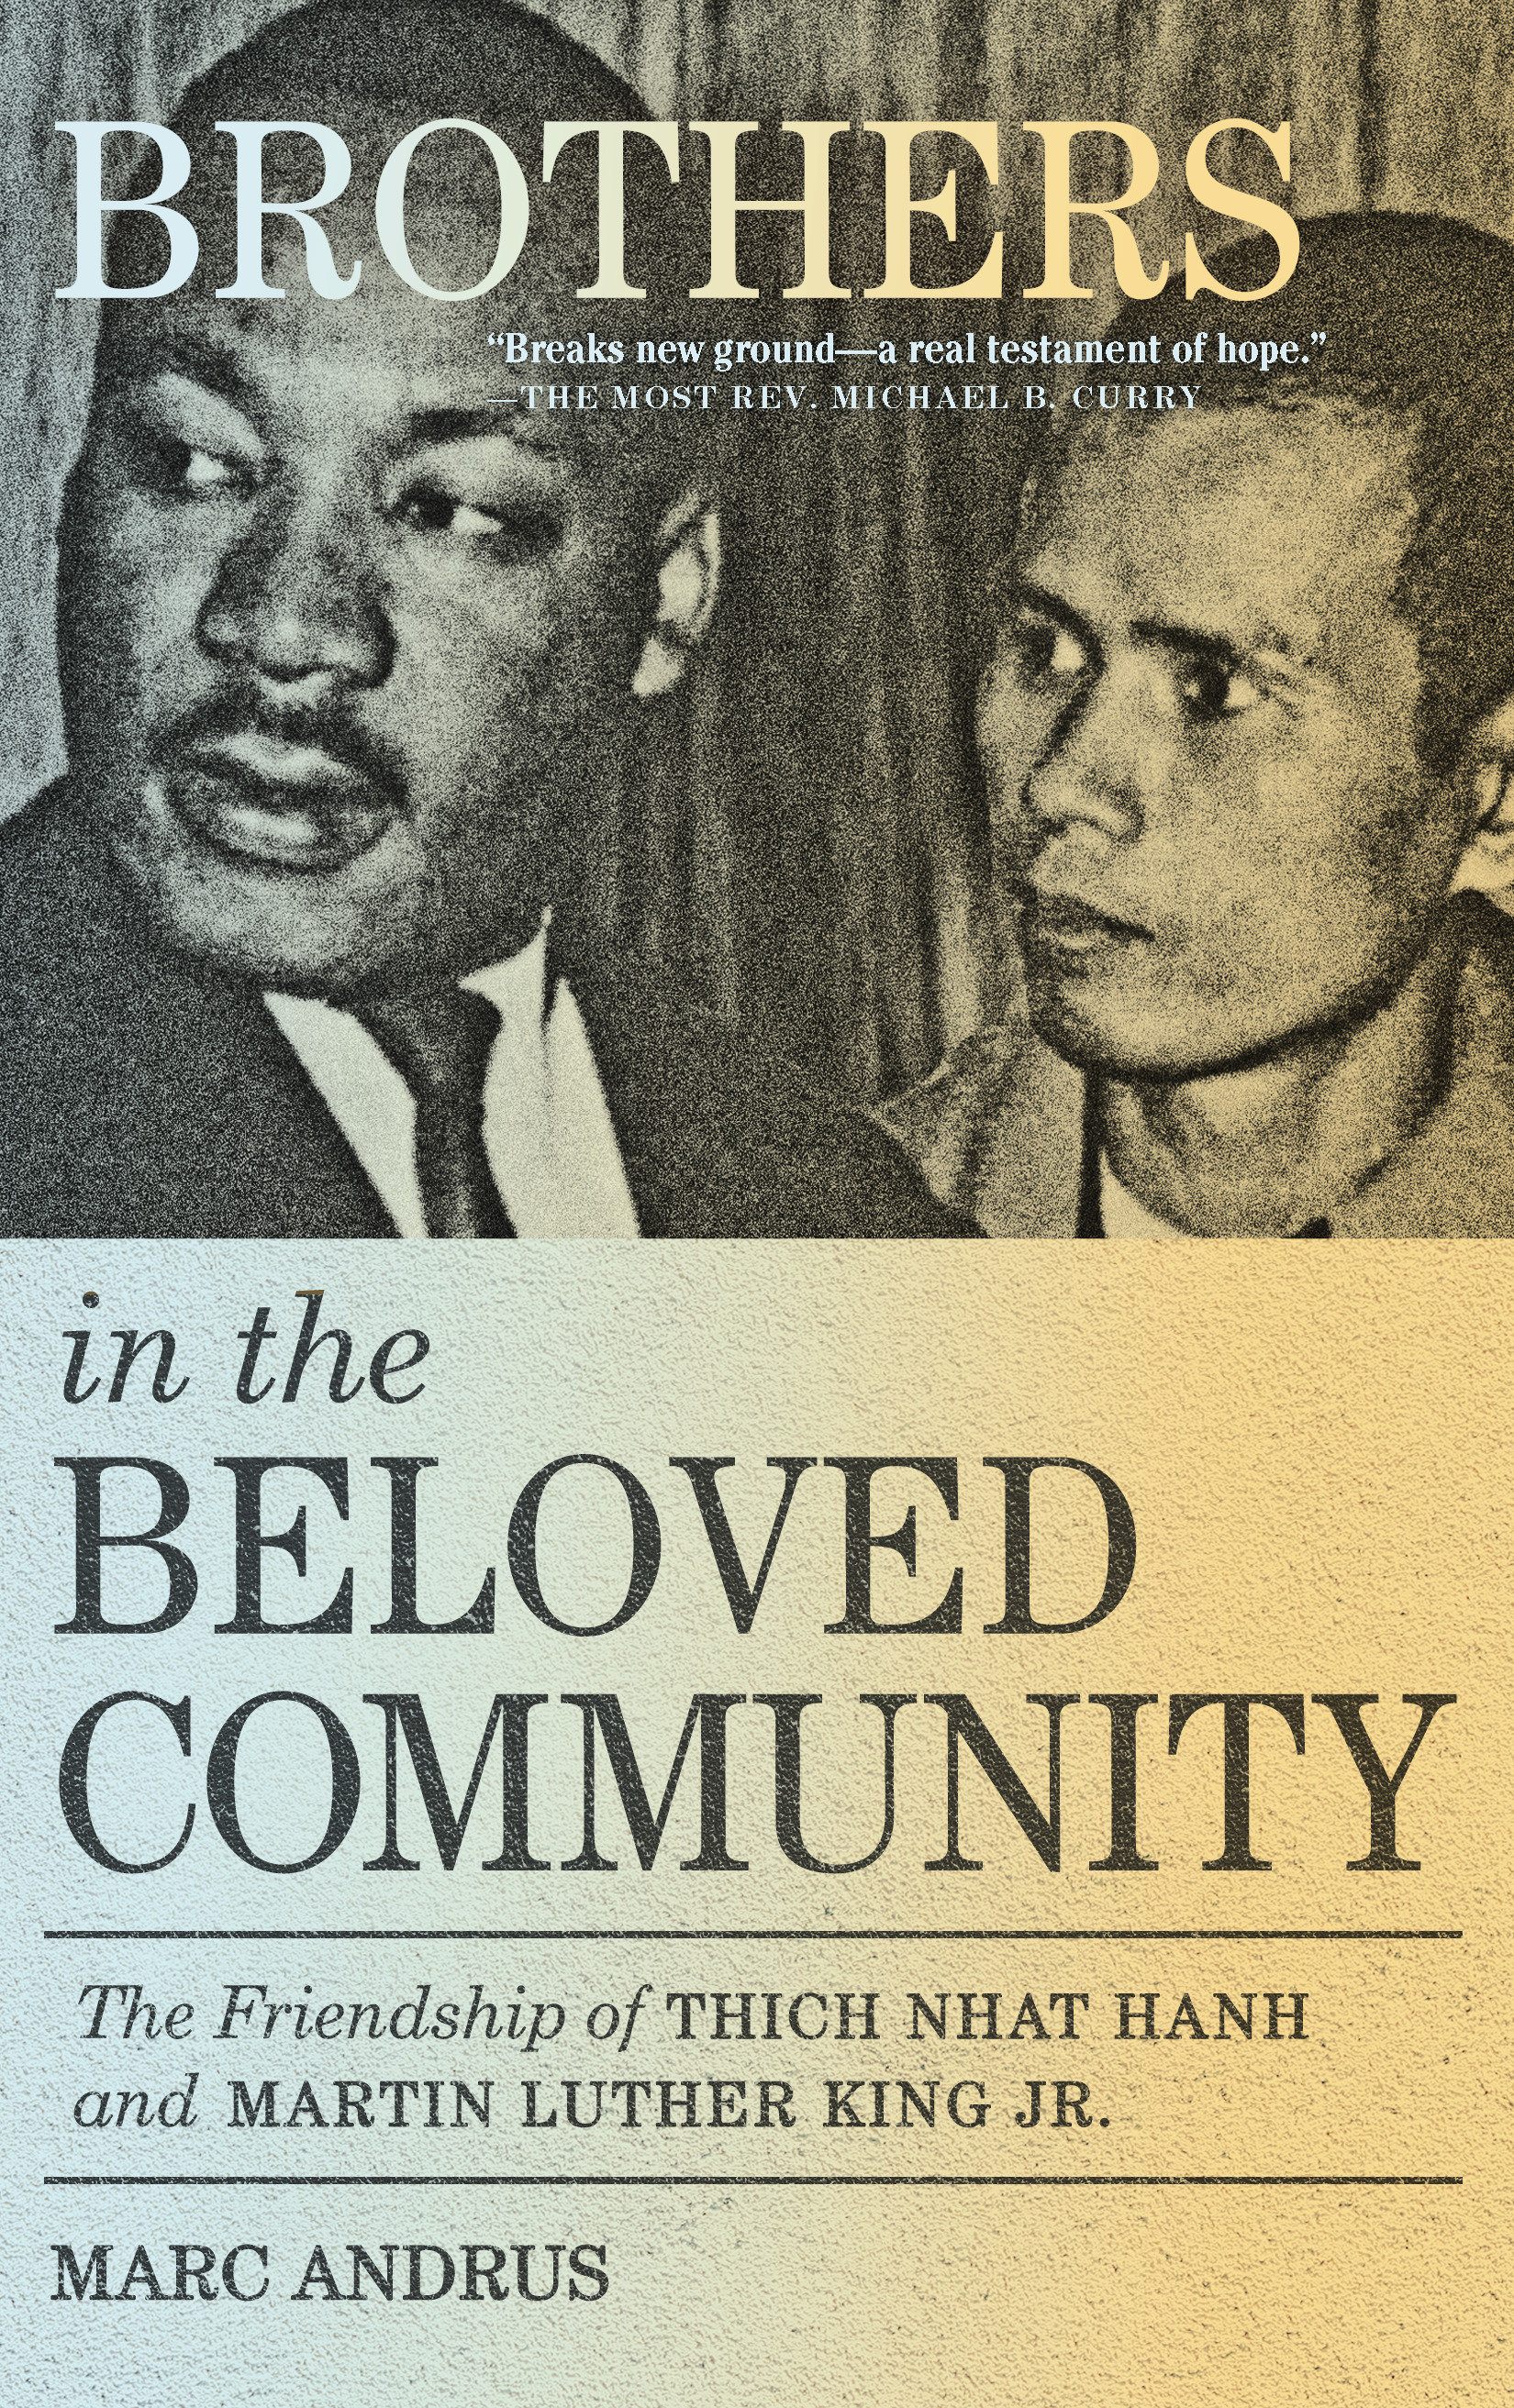 Brothers In The Beloved Community (Hardcover Book)